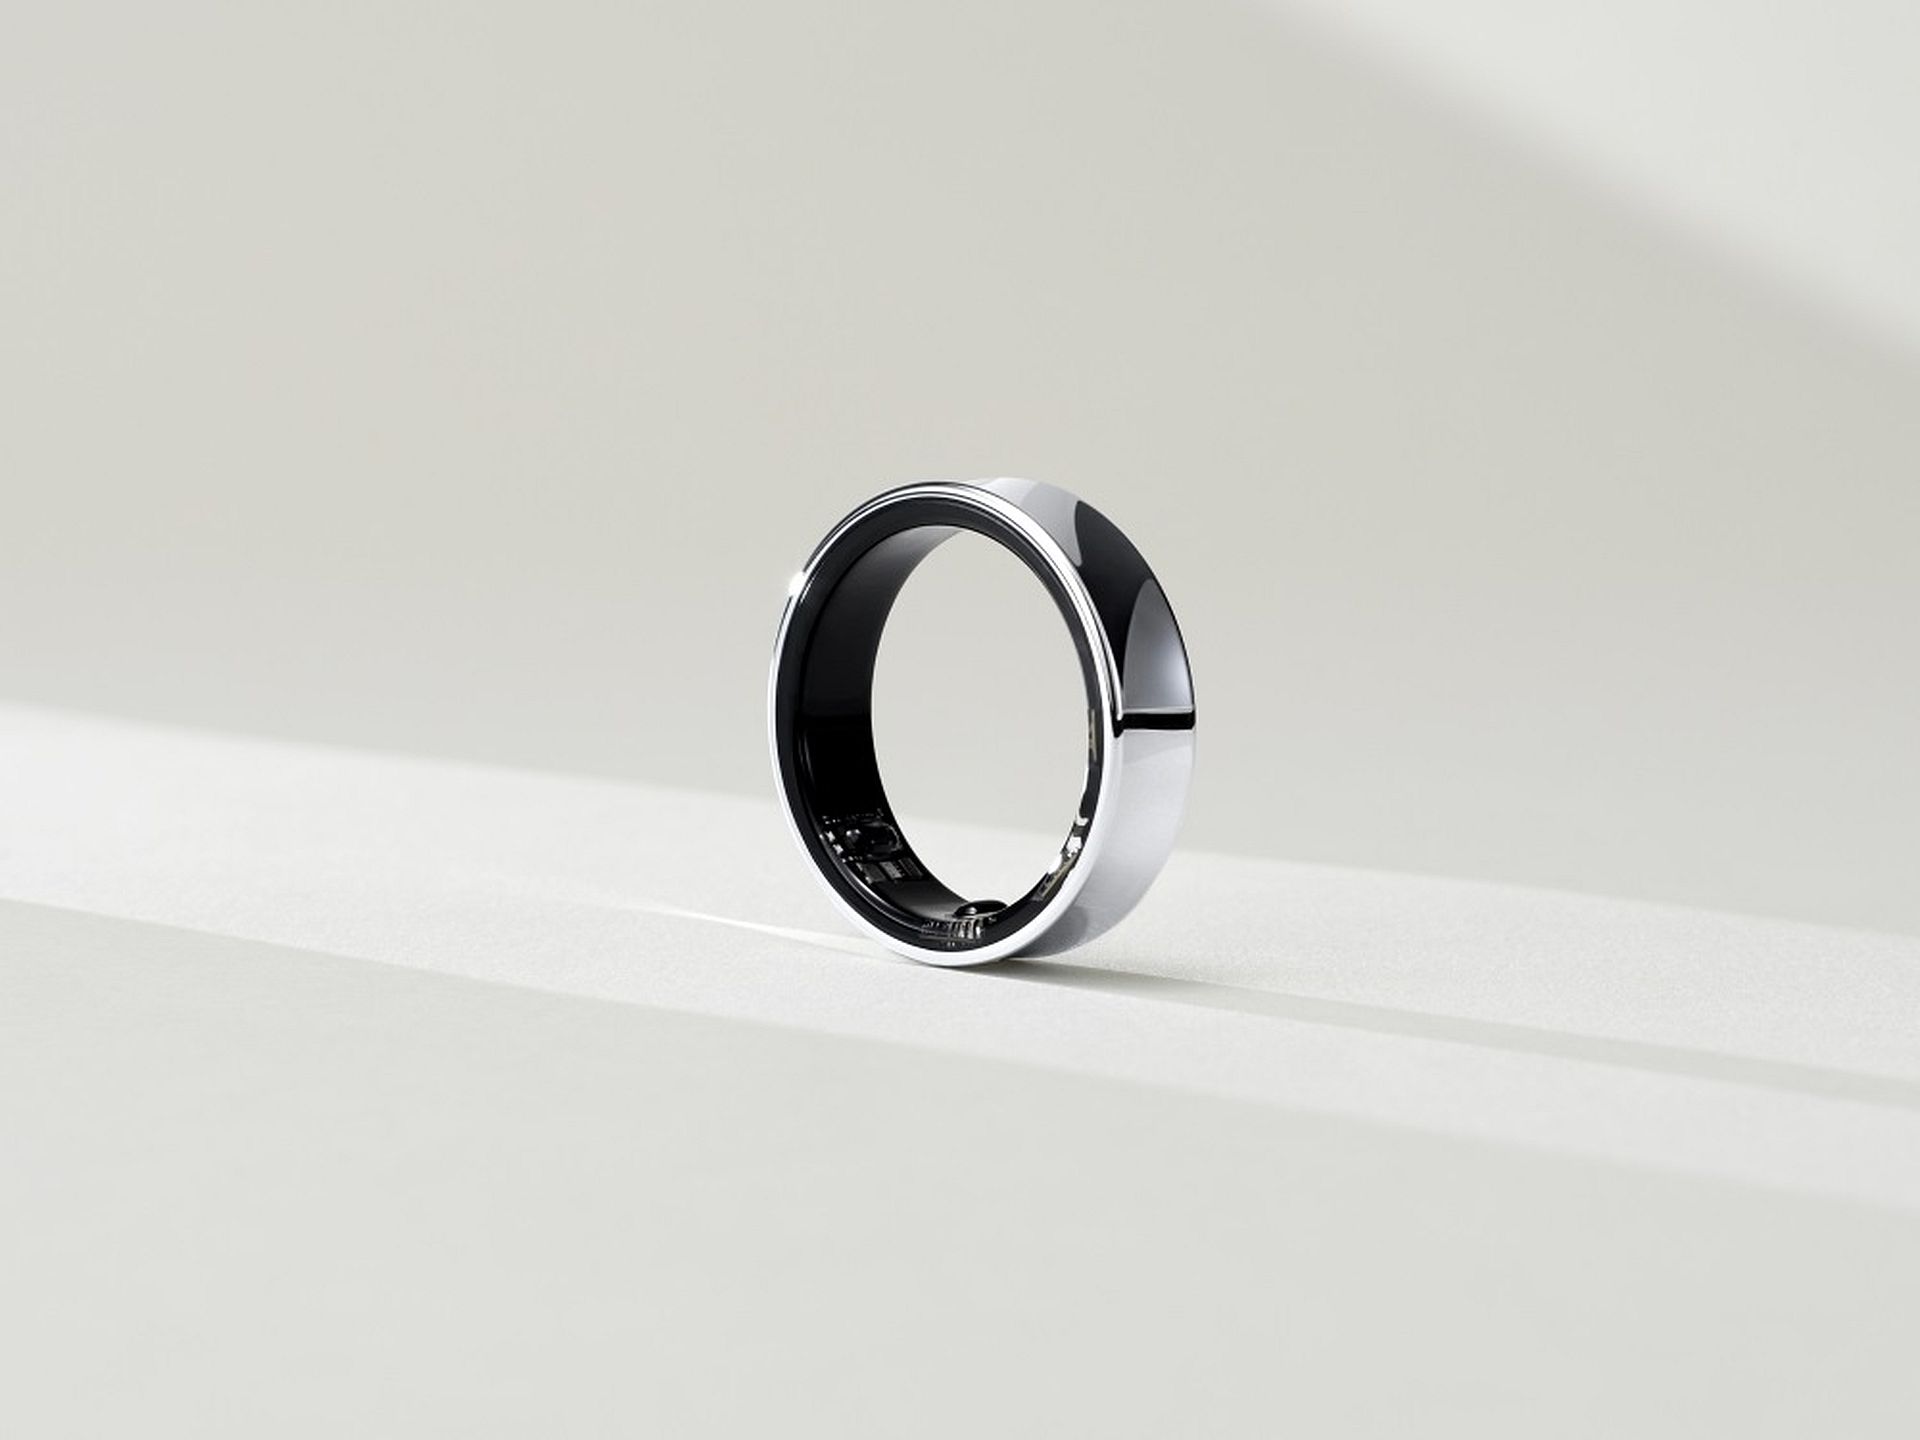 What are the Samsung Galaxy Ring features? Advanced sensors, vitality score, and seamless integration await. Join the wellness revolution!